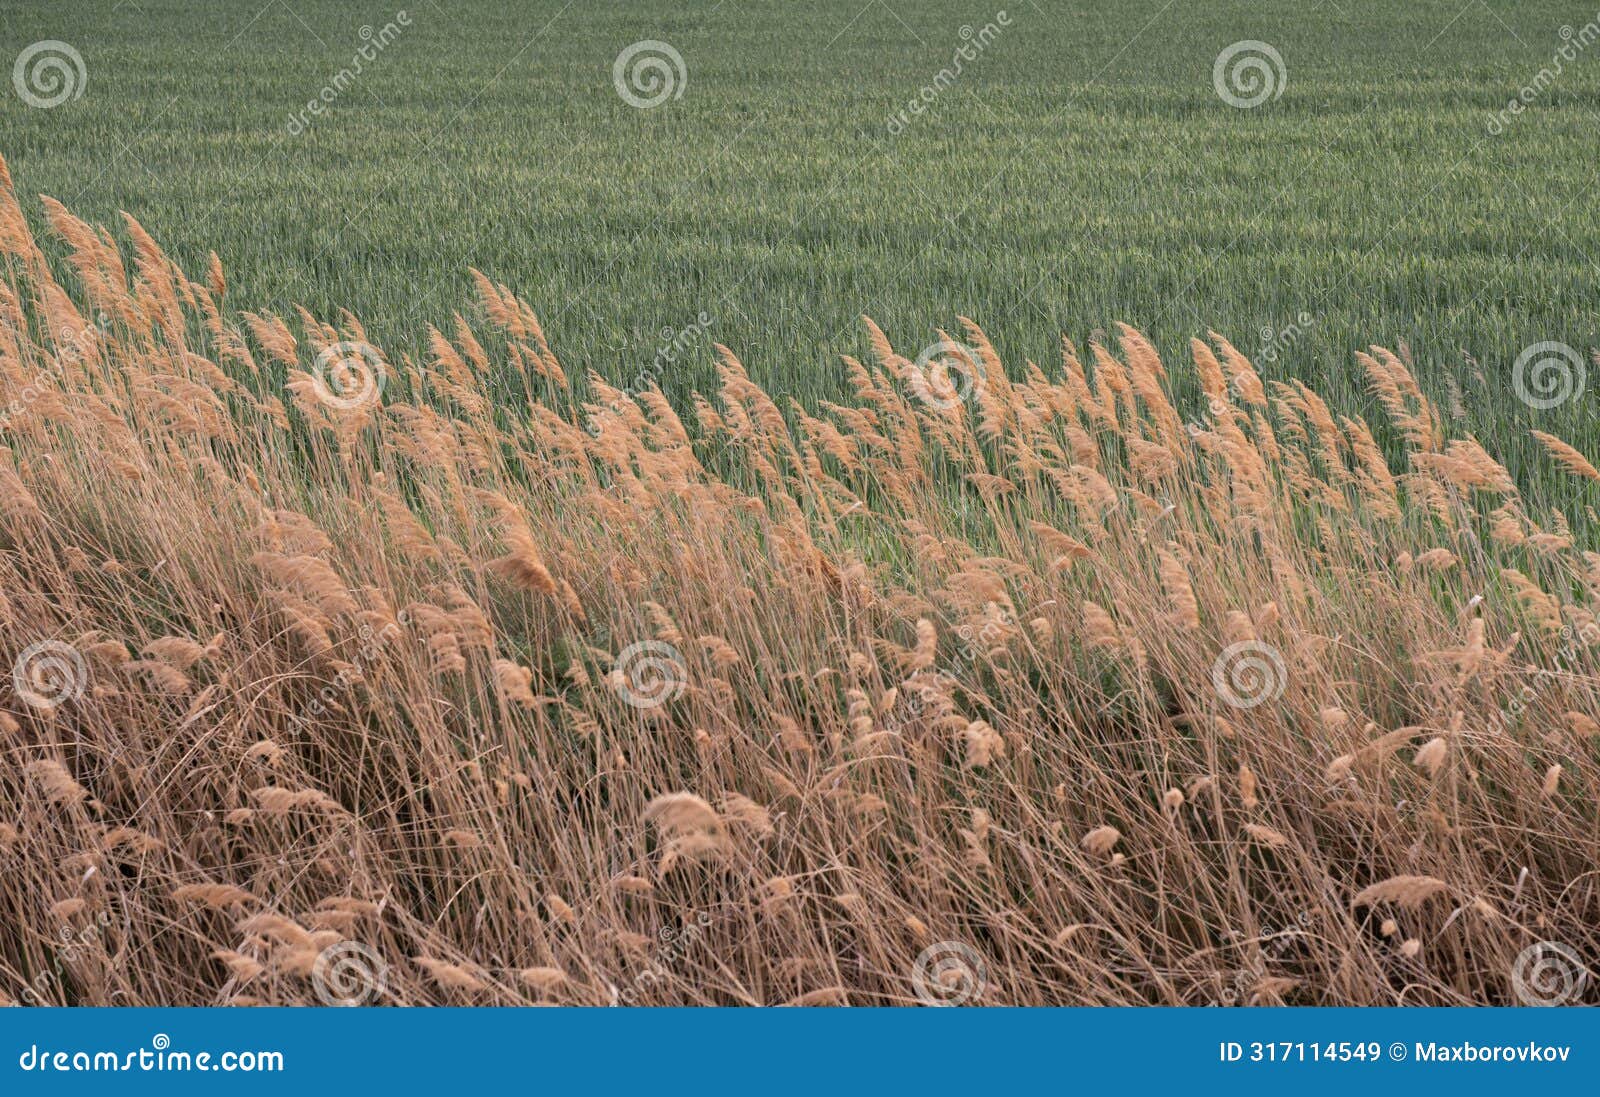 contrast of golden reeds and green wheat field